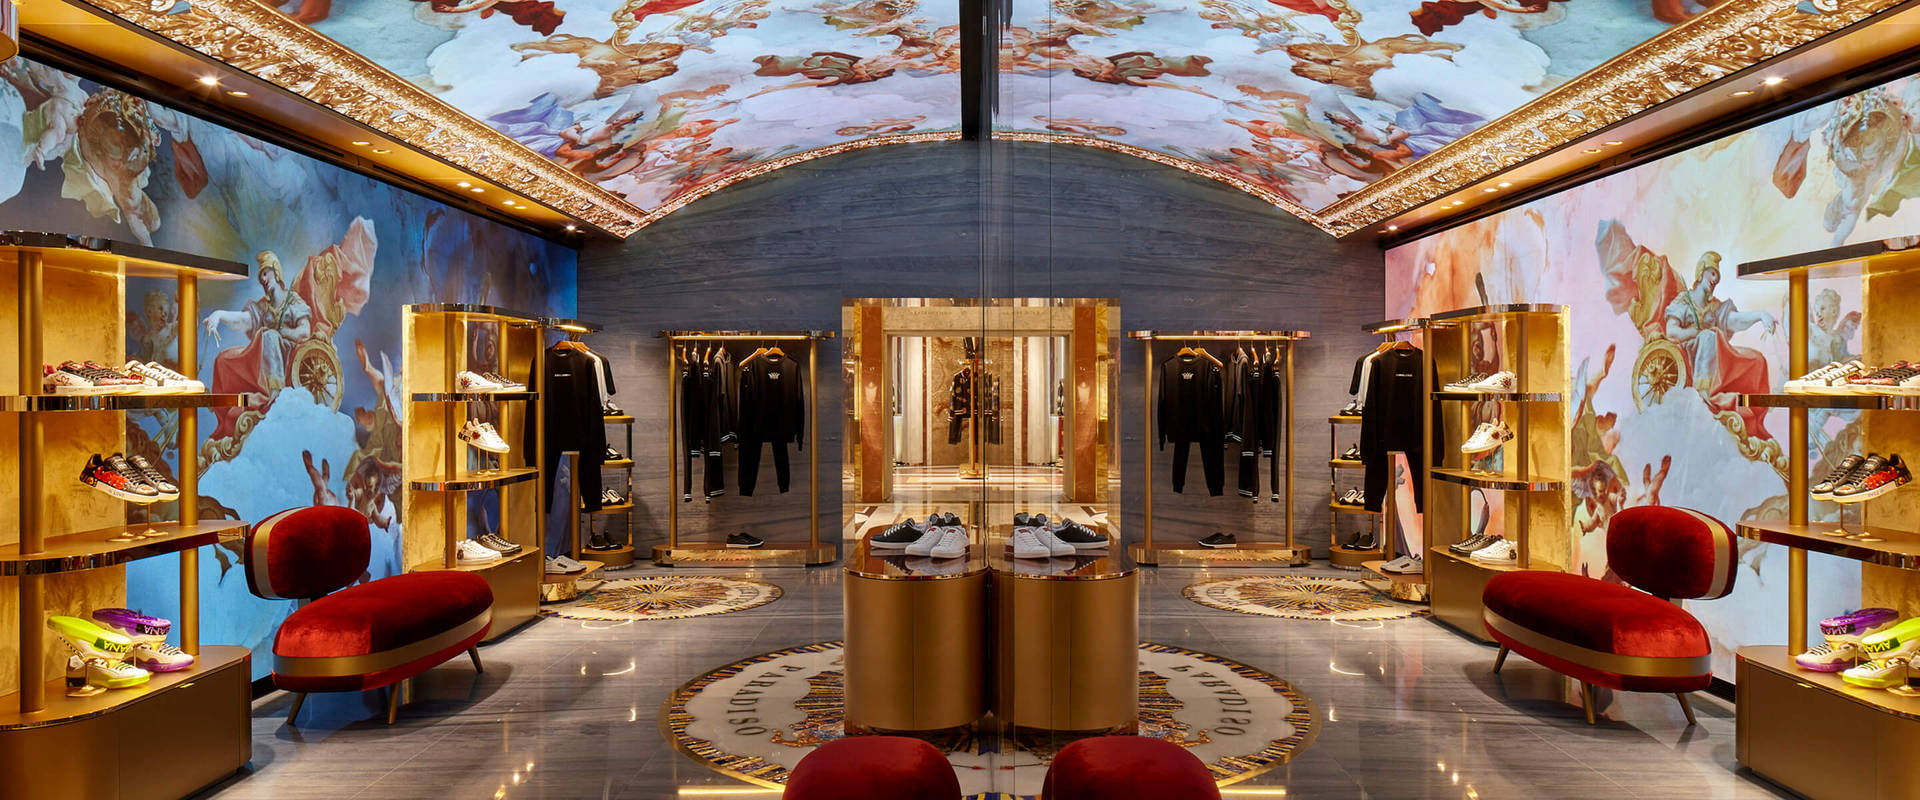 Luxury charm in Dolce And Gabbana store Wallpaper